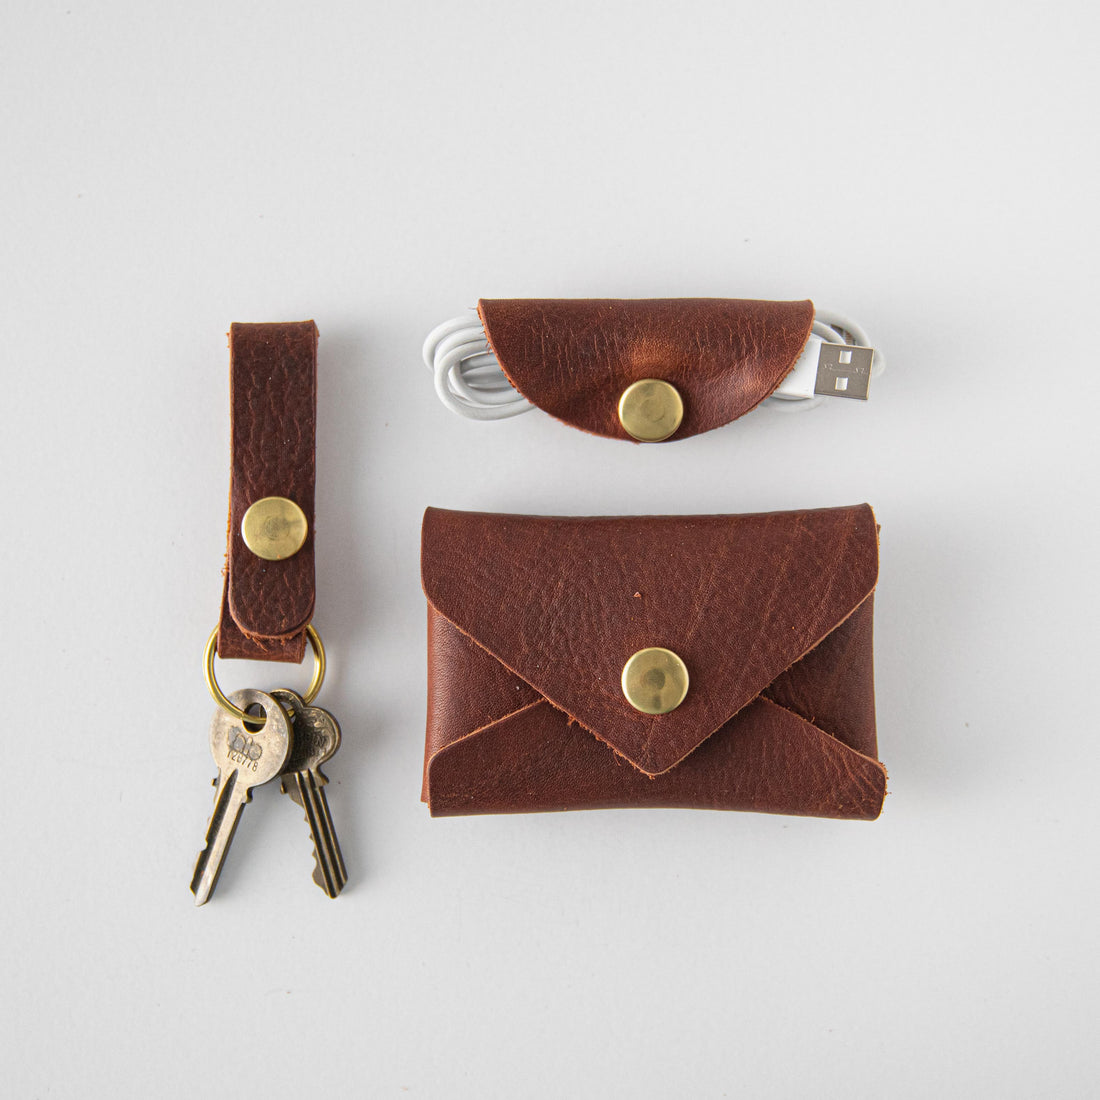 Tiny Tote Bag Charm | Leather Tote Bag Charms by KMM & Co. No Thanks